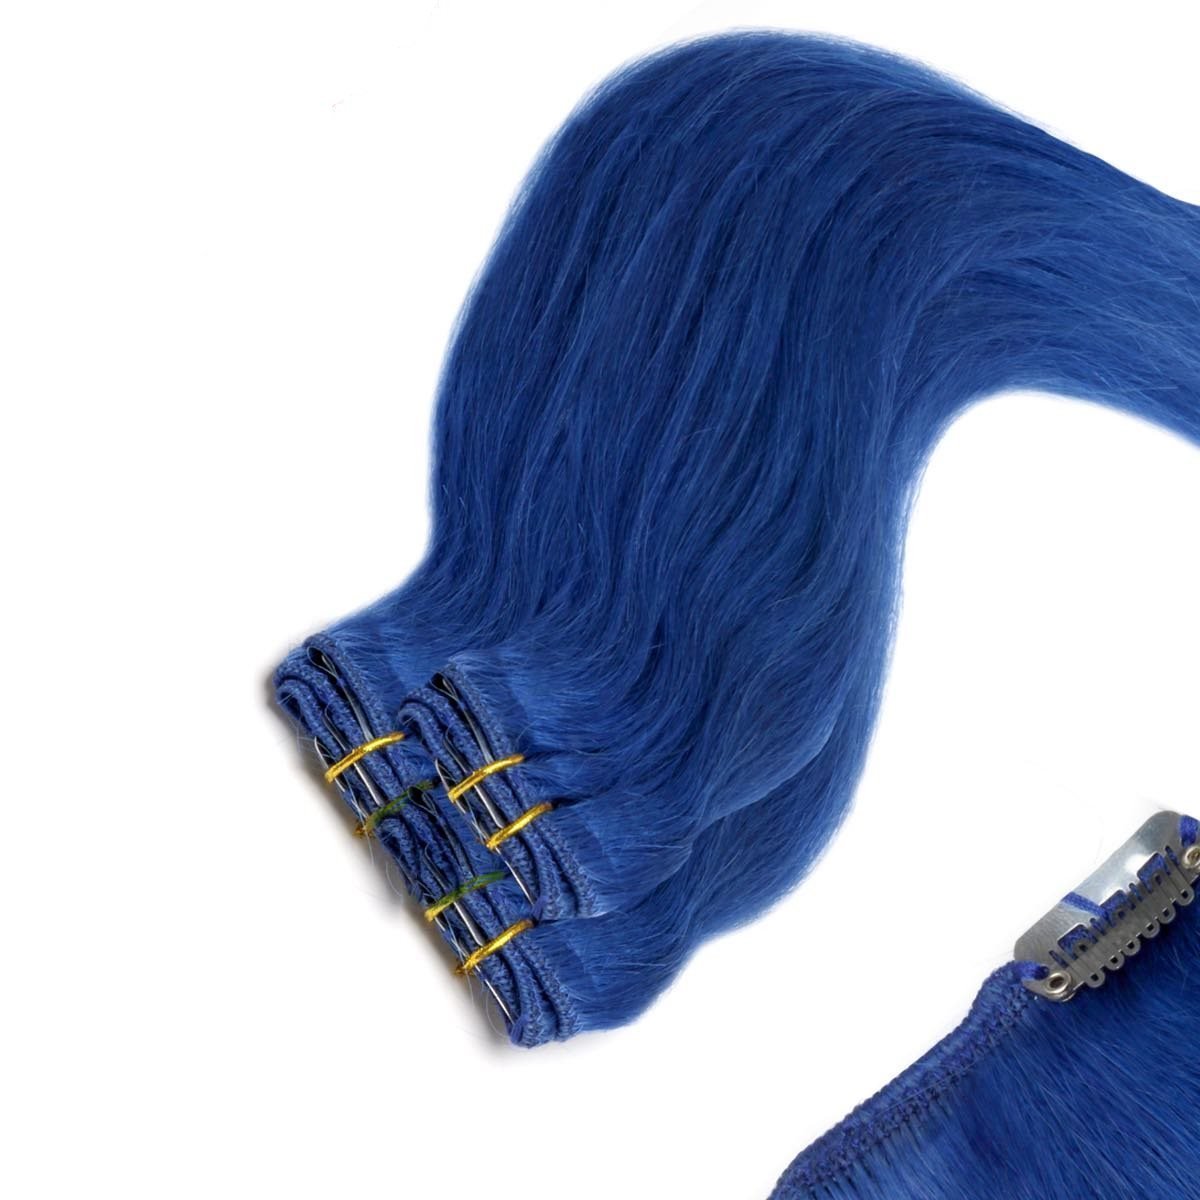 Economy Full Head Clip in Hair Extensions 18 inch - Blue - beautyhair.co.ukHair Extensions